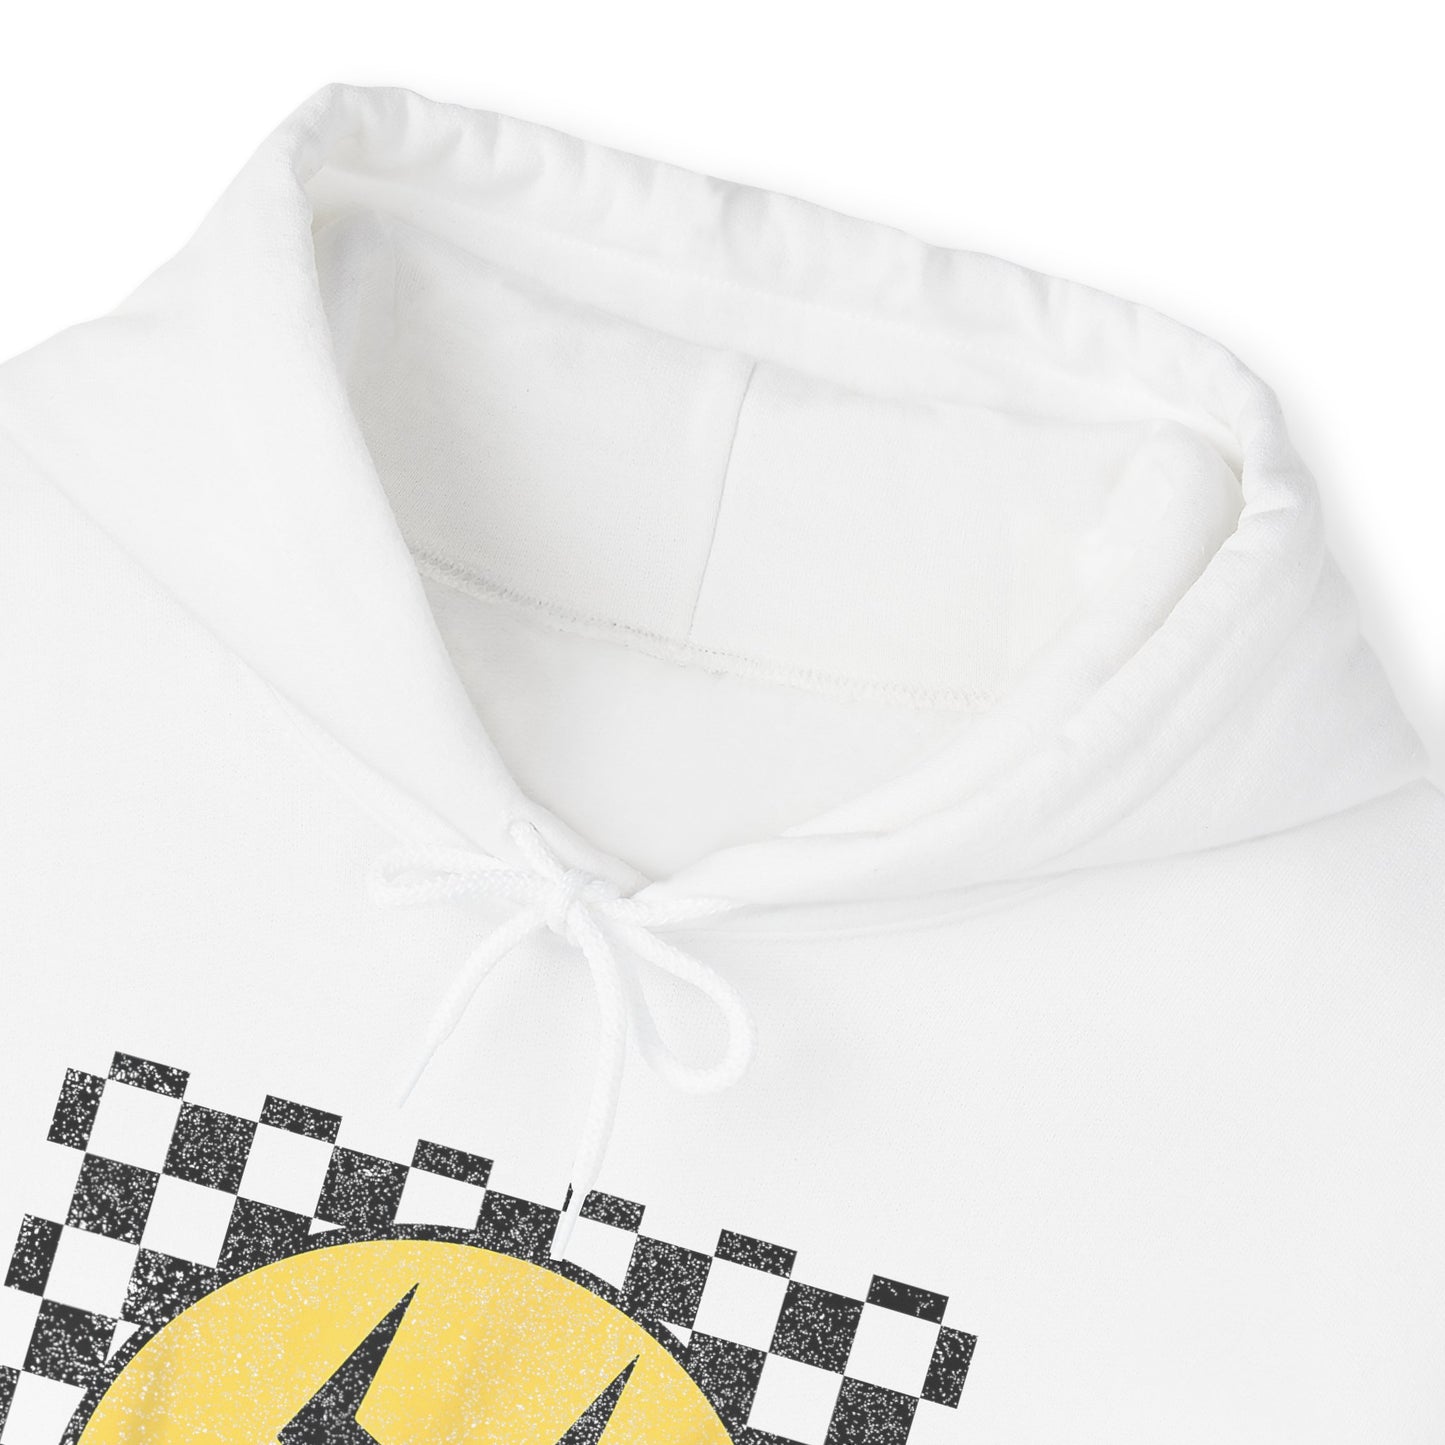 Checkered Smiley Face Hooded Sweatshirt